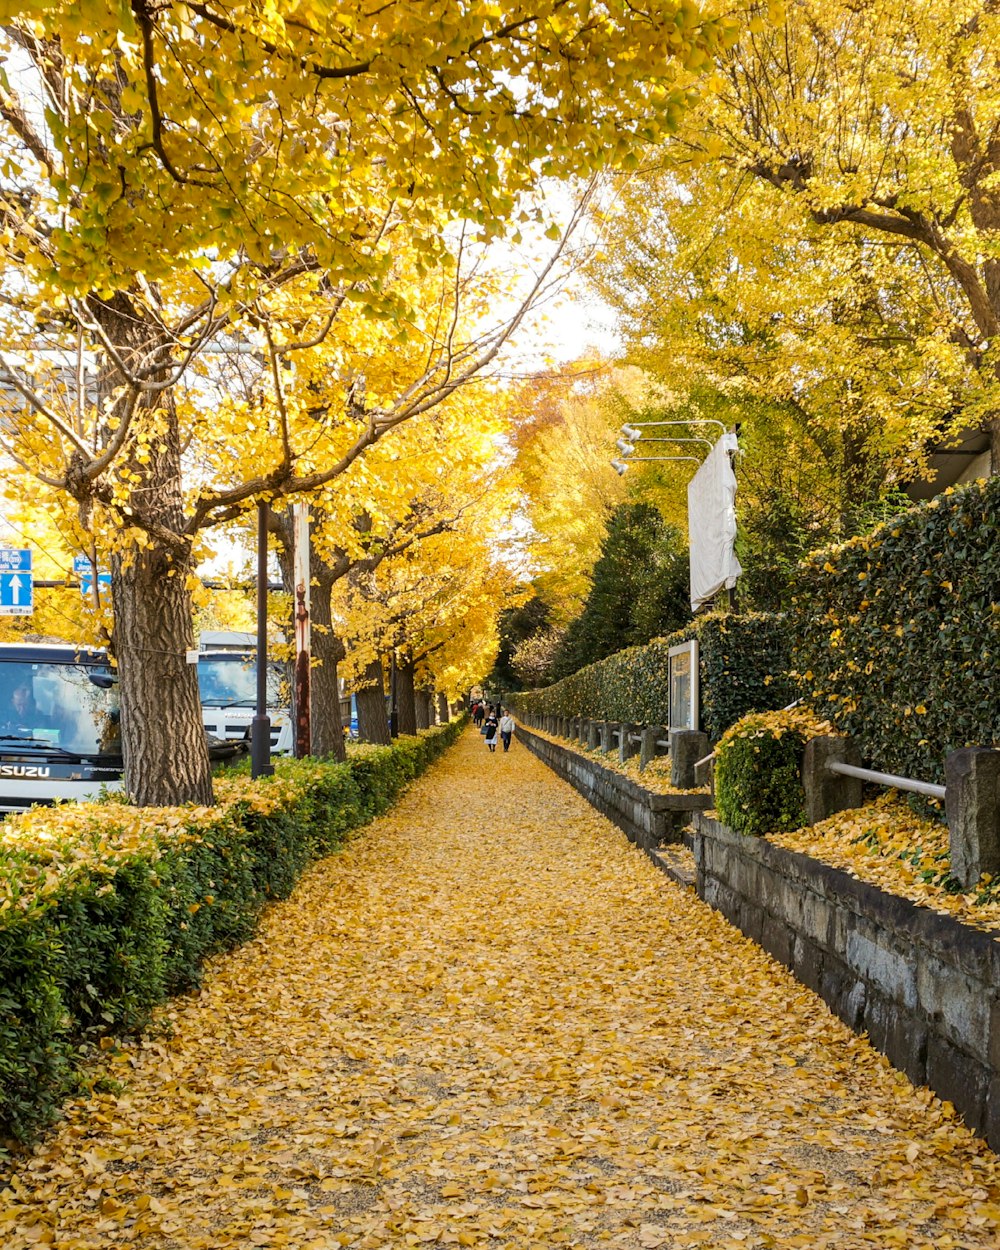 a yellow leaf covered street lined with trees